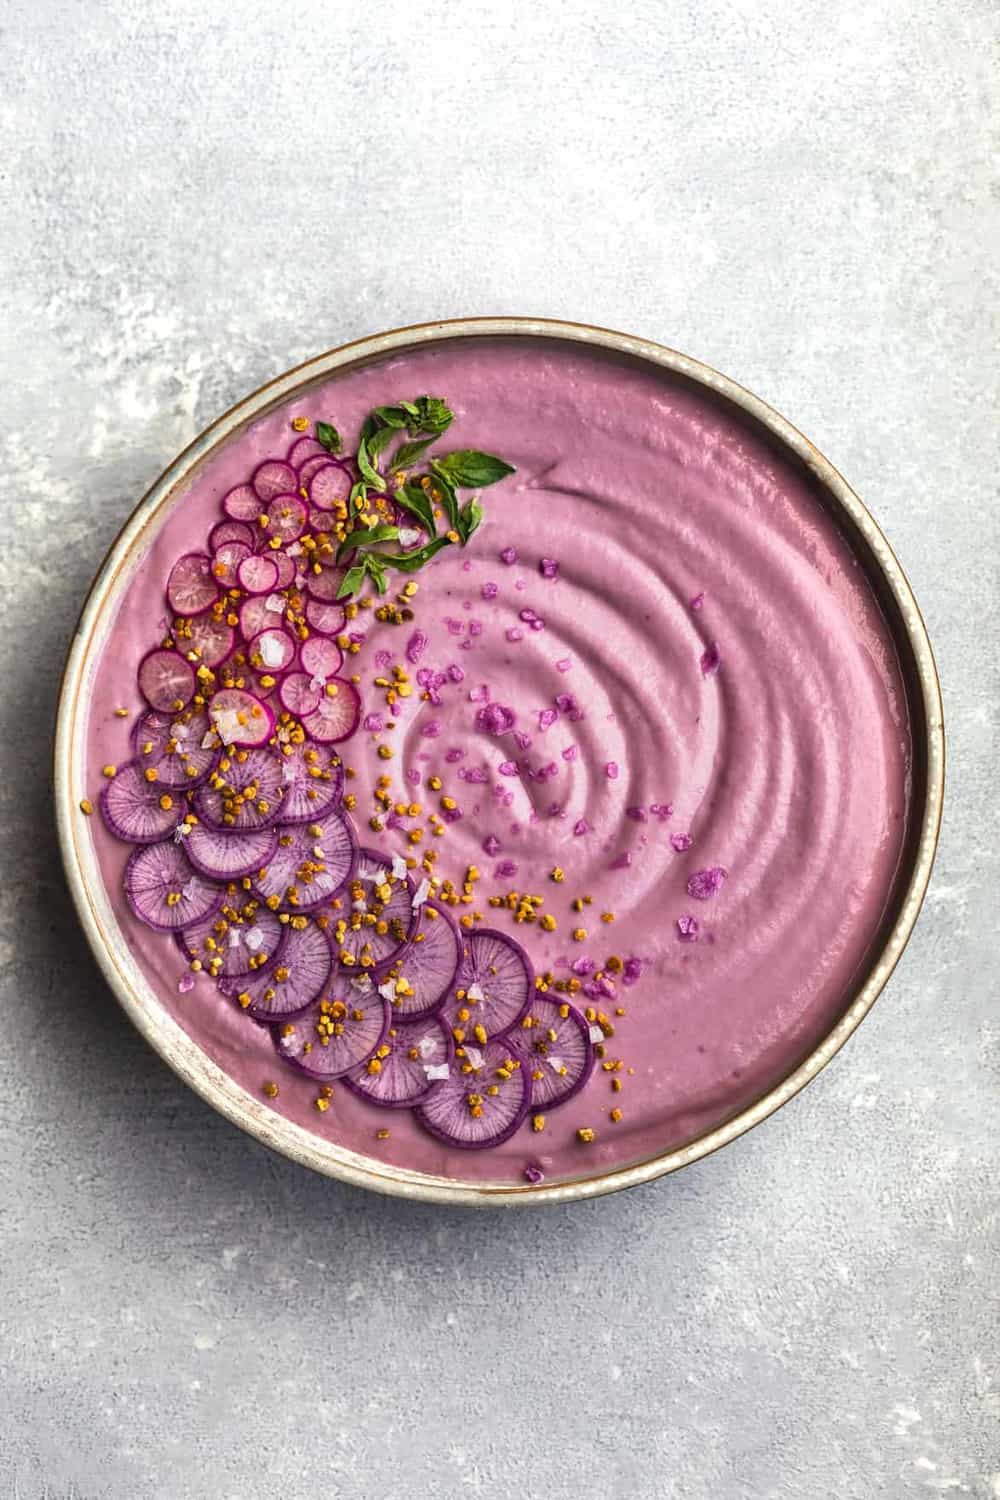 Vegan Purple Cauliflower Soup with Sliced Purple and Pink Radishes, tiny basil leaves, Bee Pollen and Flaky Sea Salt. Overhead shot. Bowl is in center of the frame on a white/light blue background.